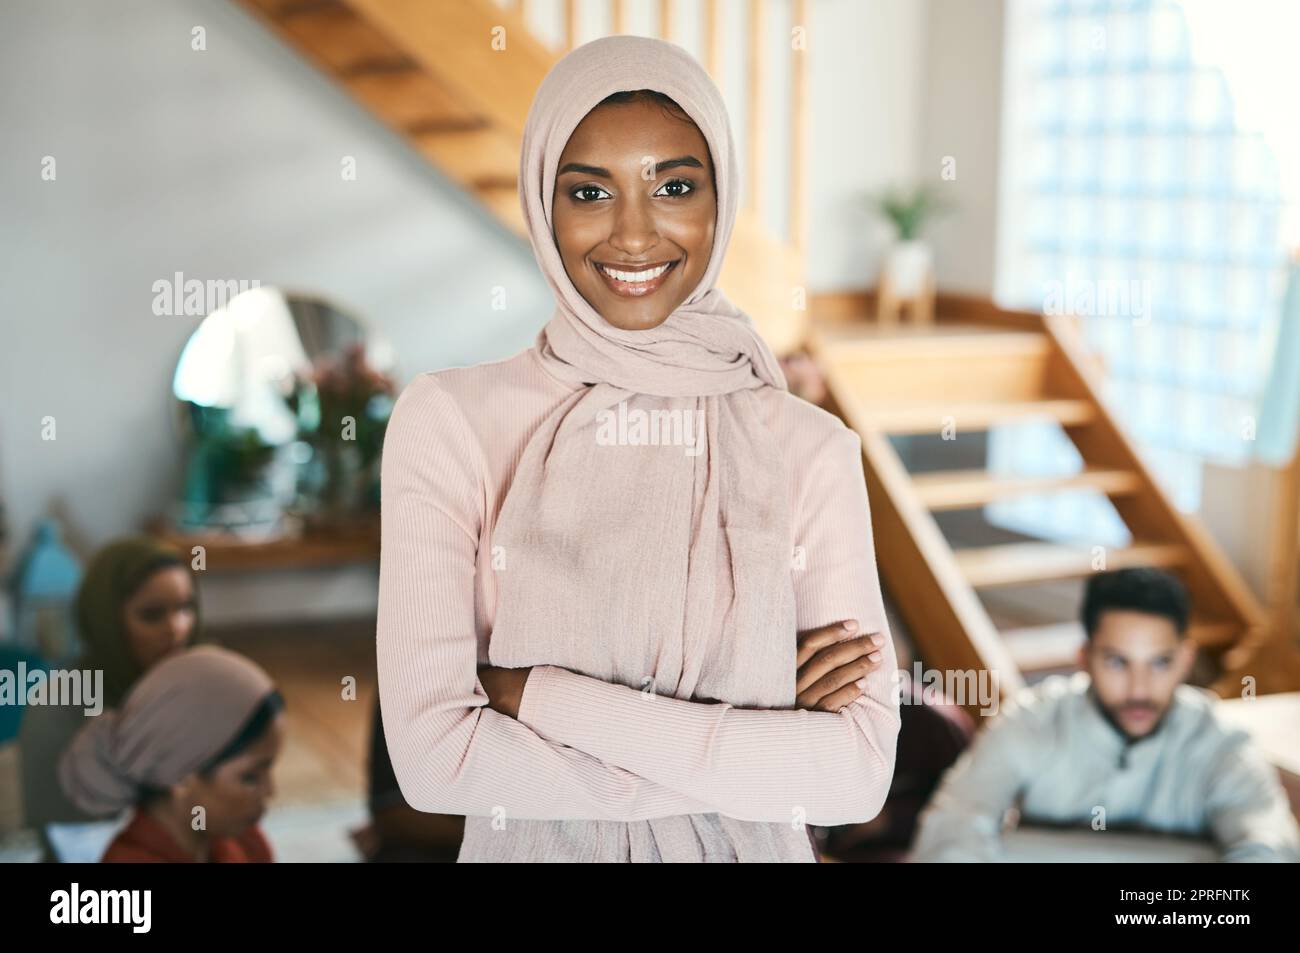 Muslim, arab and islamic woman in hijab headscarf enjoying eid, ramadan or holiday with family while celebrating religion, holy culture and islam faith. Portrait of a happy, smiling and modest female Stock Photo